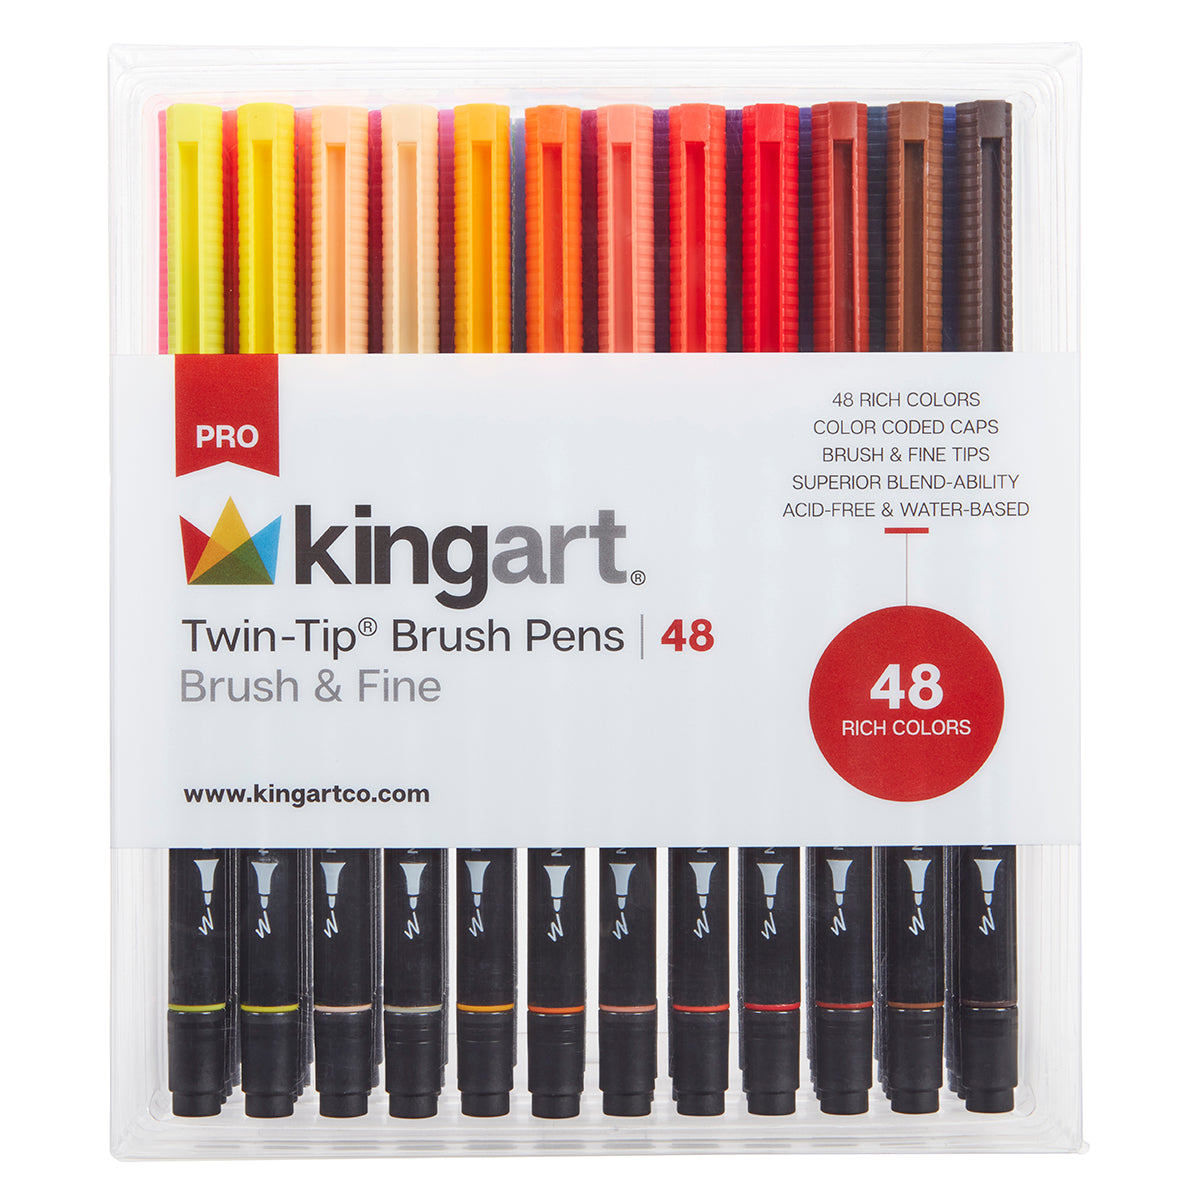 Swatch Template for Kingart Double-ended Art Marker 120 Count Paper 